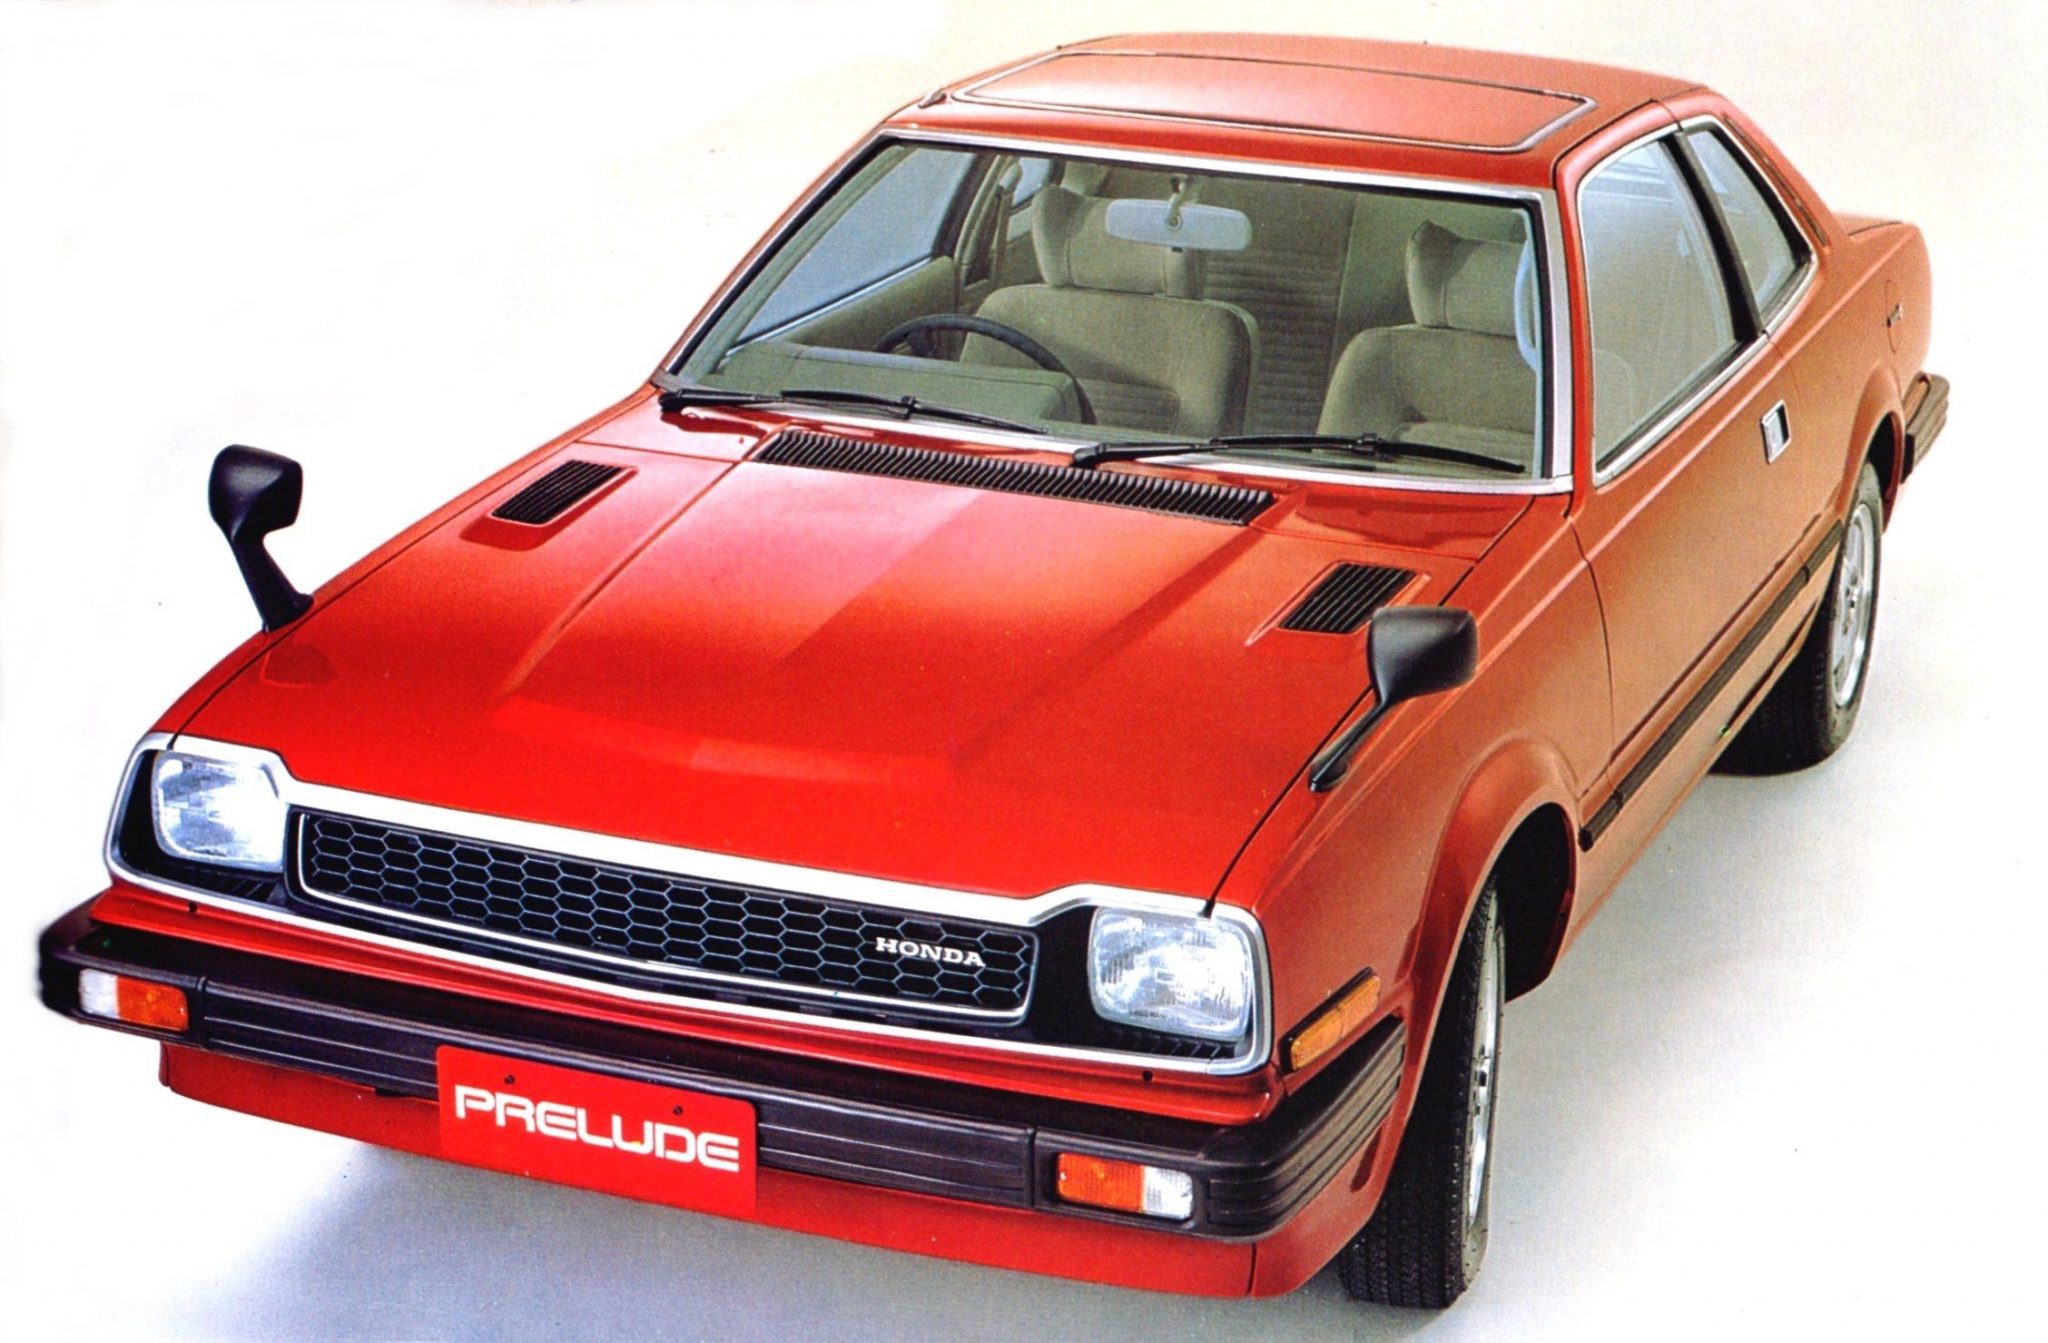 1st gen Honda Prelude scaled - Honda’s Most Iconic Cars